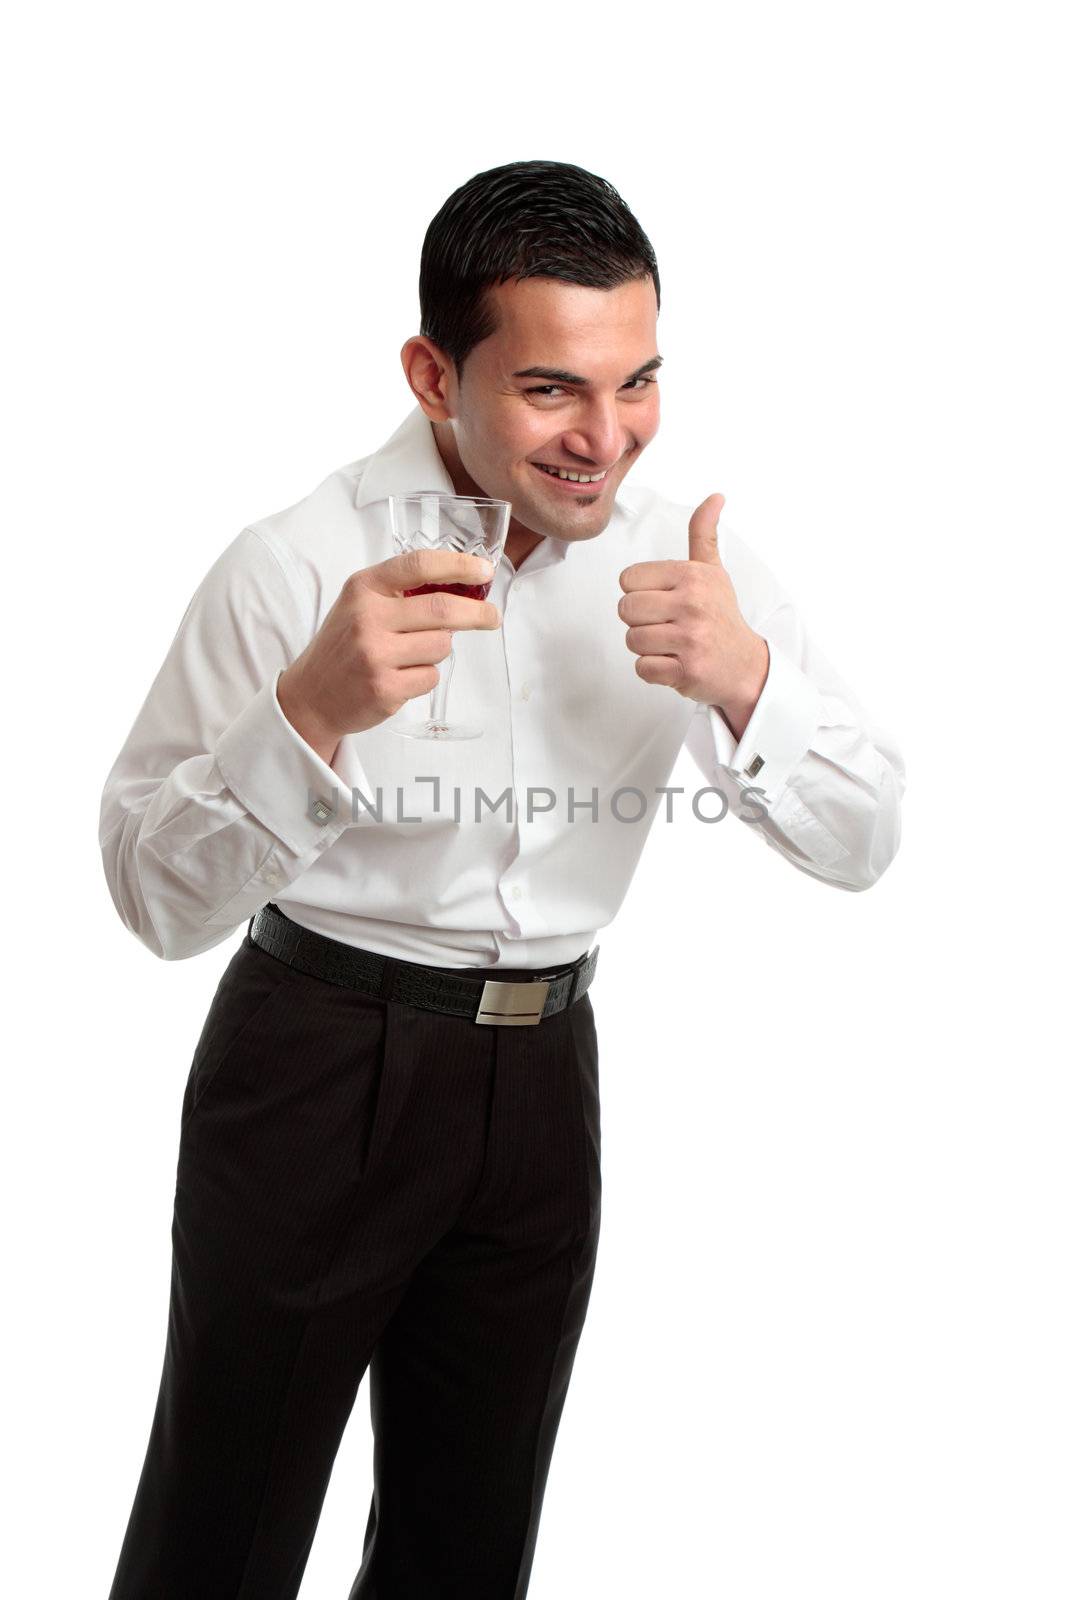 A happy, laughing and optimistic man holding a glass of red wine and showing thumbs up success or approval hand sign.